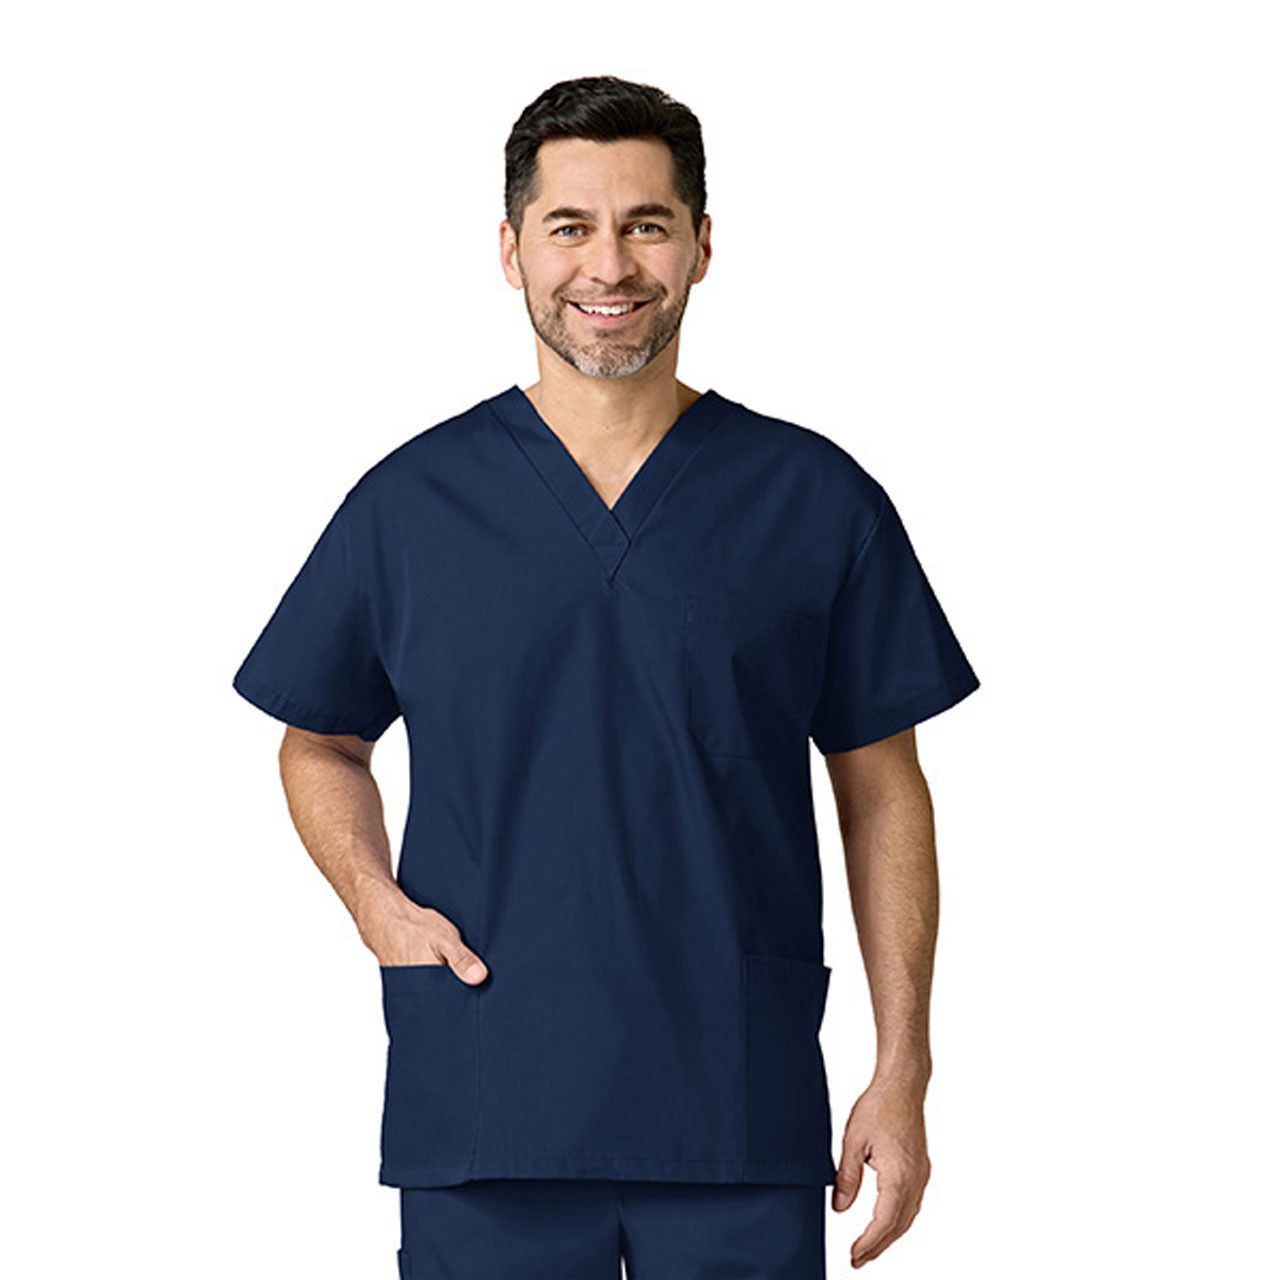 Can I purchase Navy Blue Scrub Top in less than case quantities?